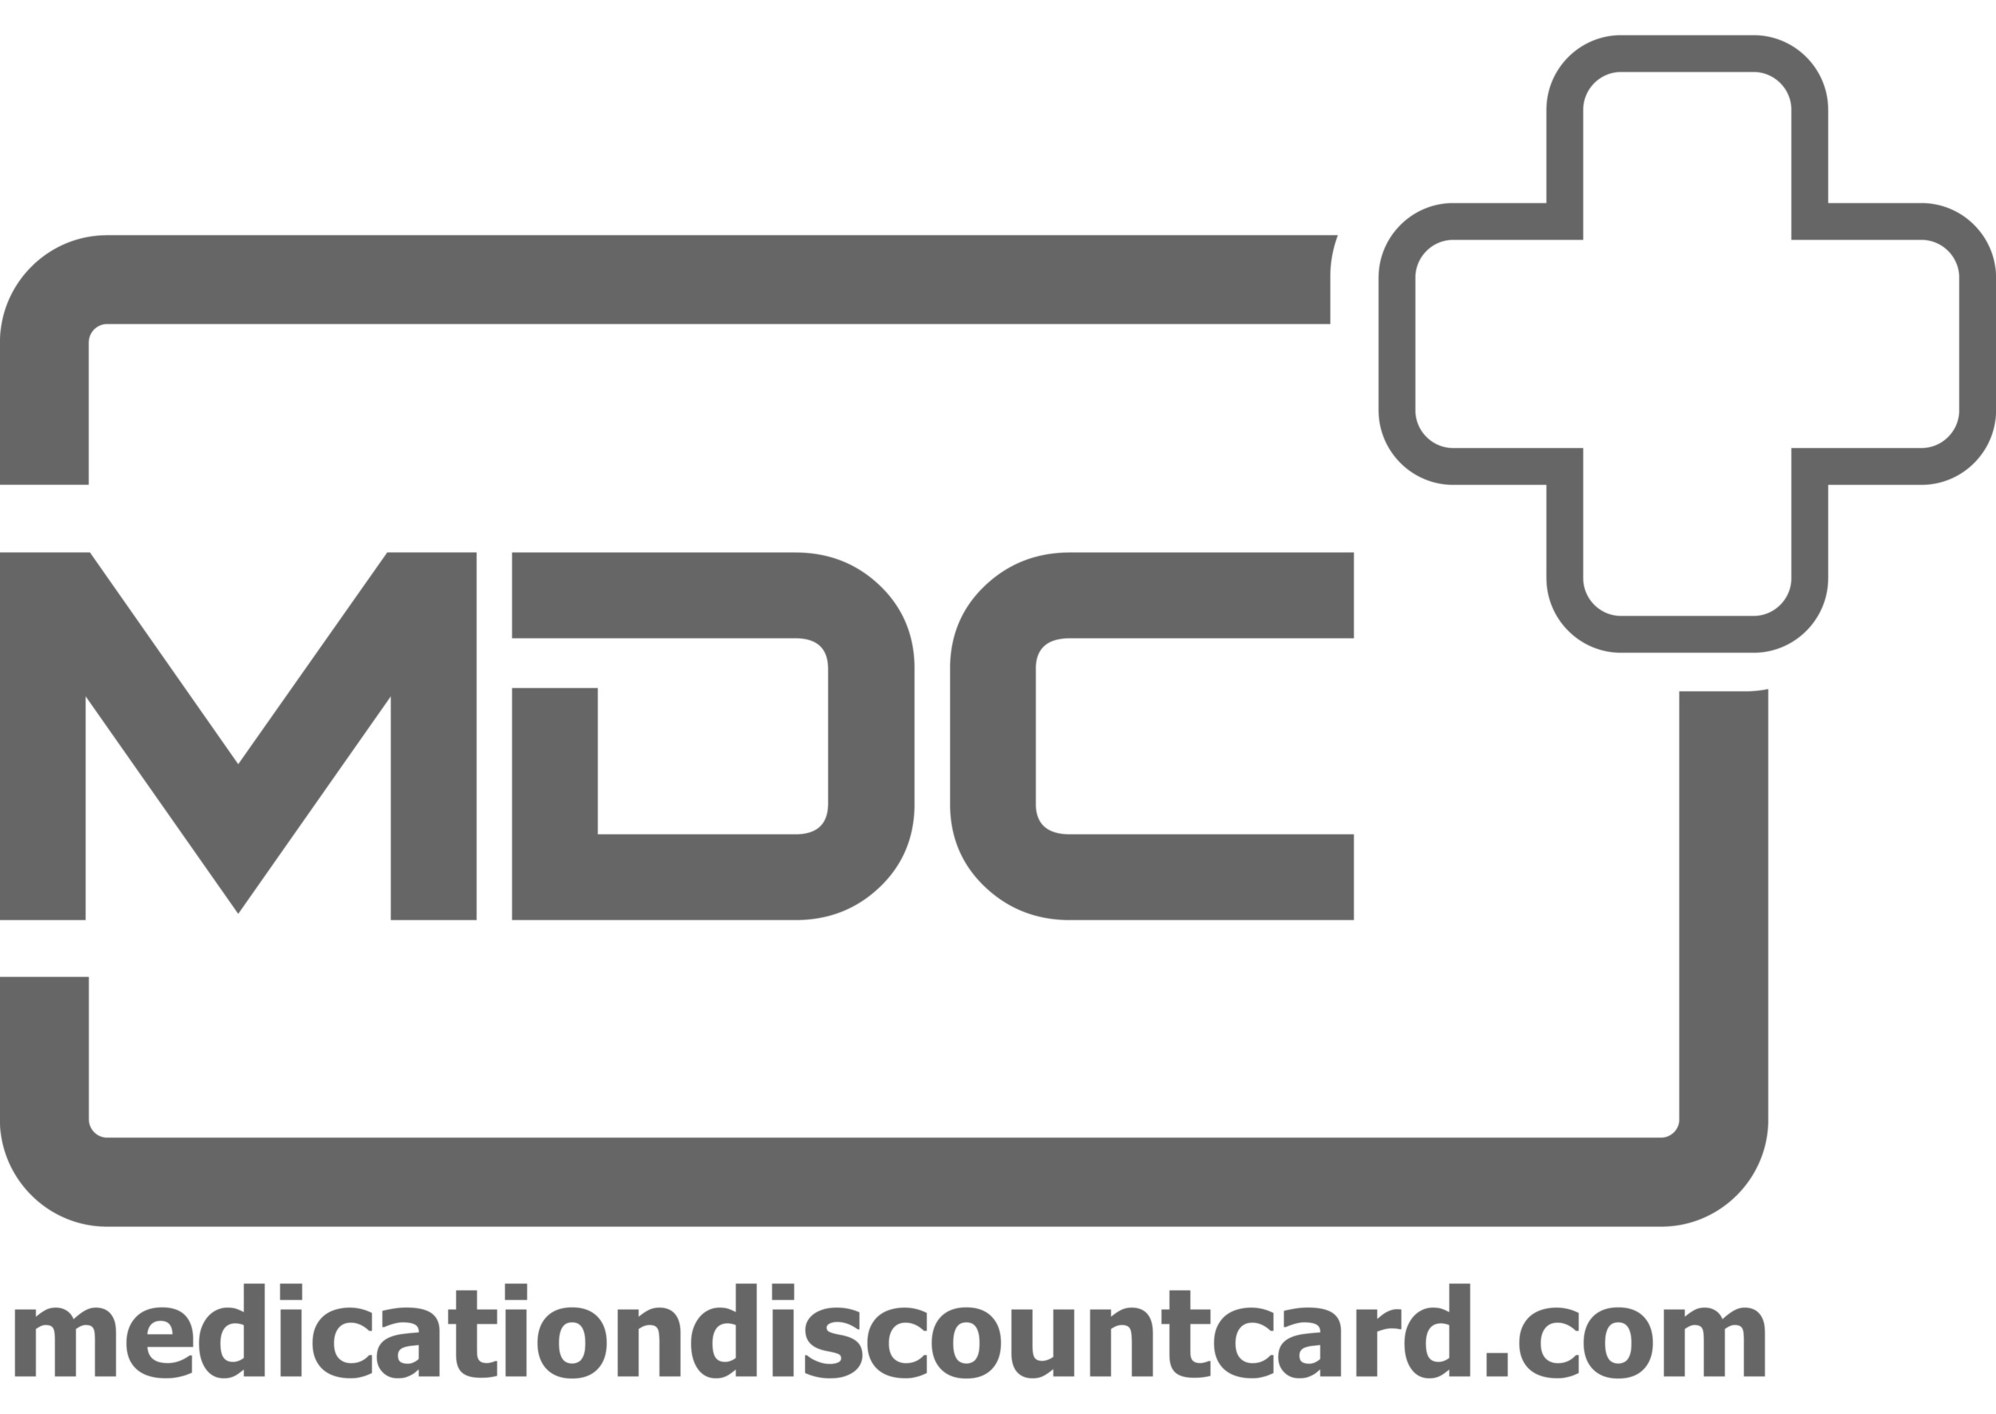 Medicationdiscountcard Com Launches New Online Feature For Comparison Shopping Of Prescription Drugs